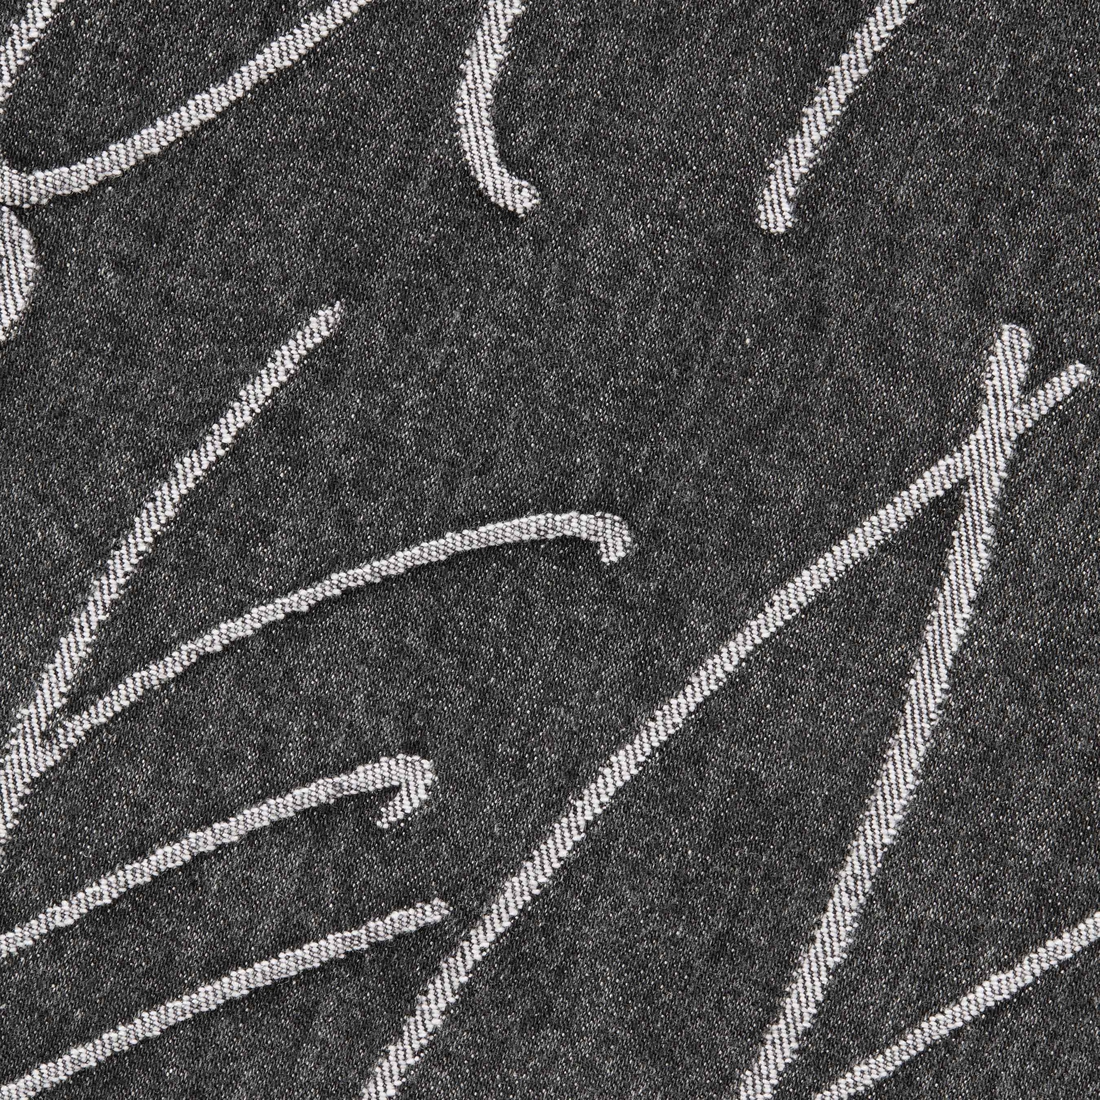 Details on Handwriting Jacquard Denim Shirt Washed Black from fall winter
                                                    2023 (Price is $148)